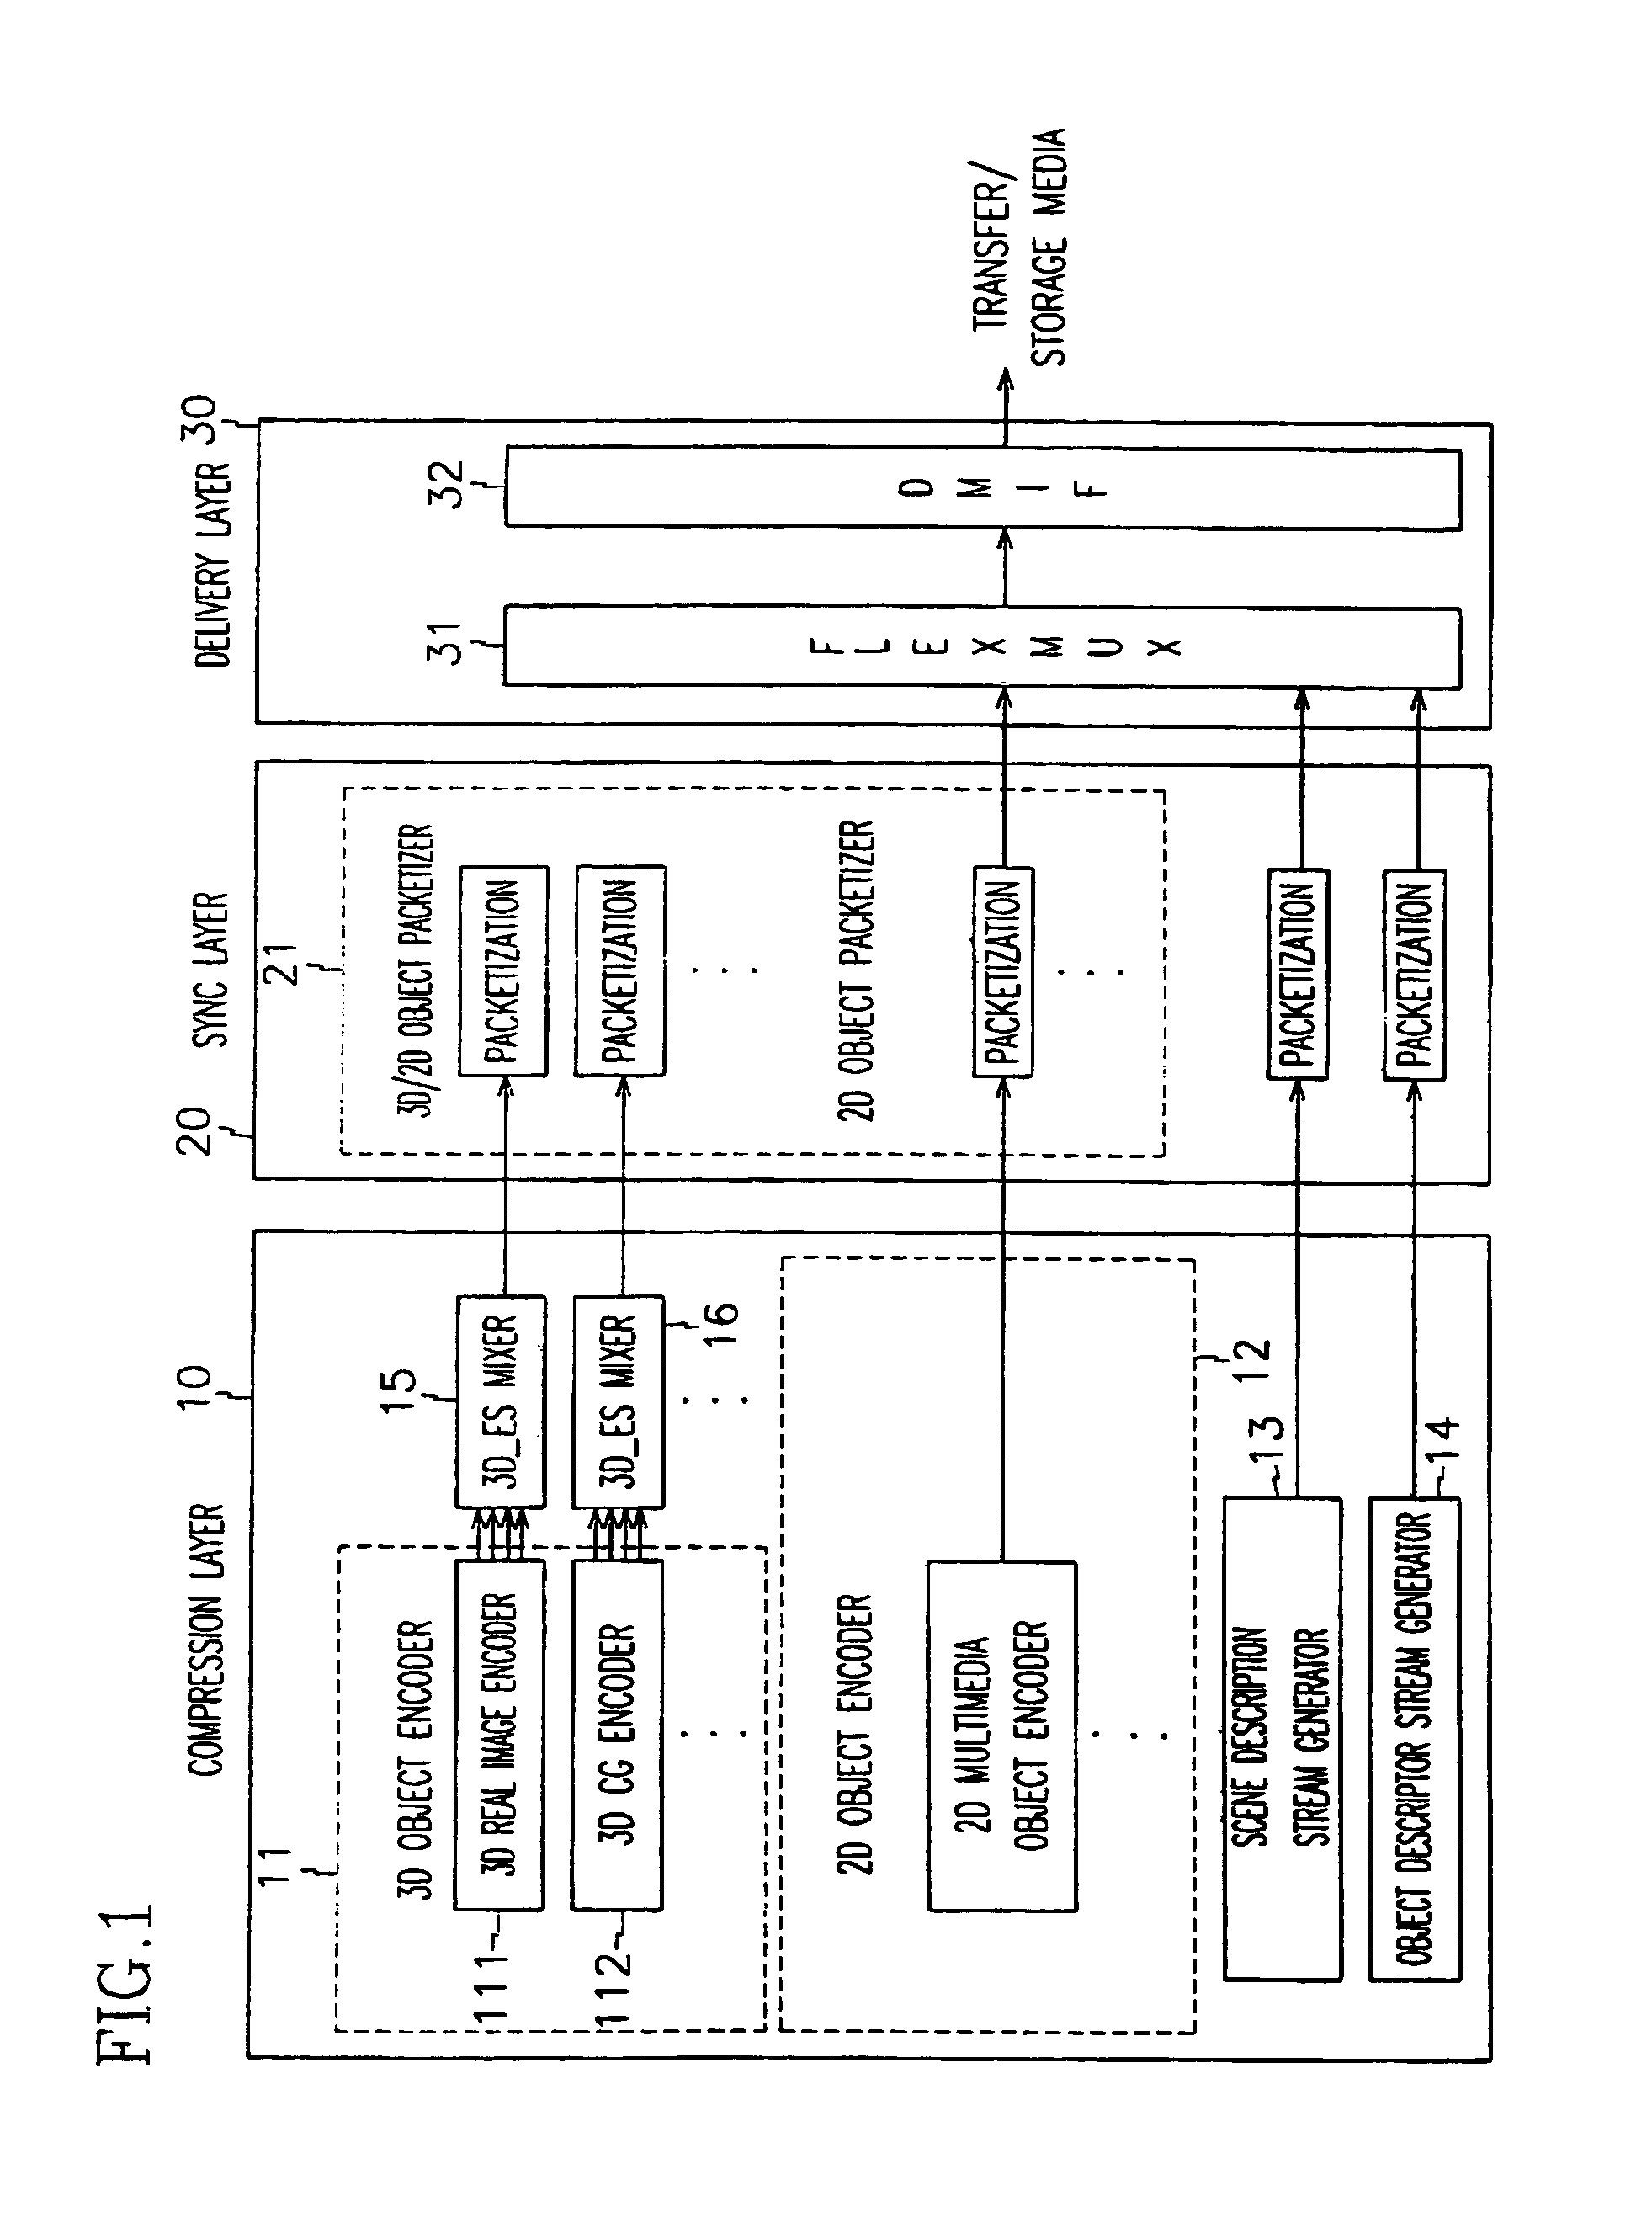 3D stereoscopic/multiview video processing system and its method